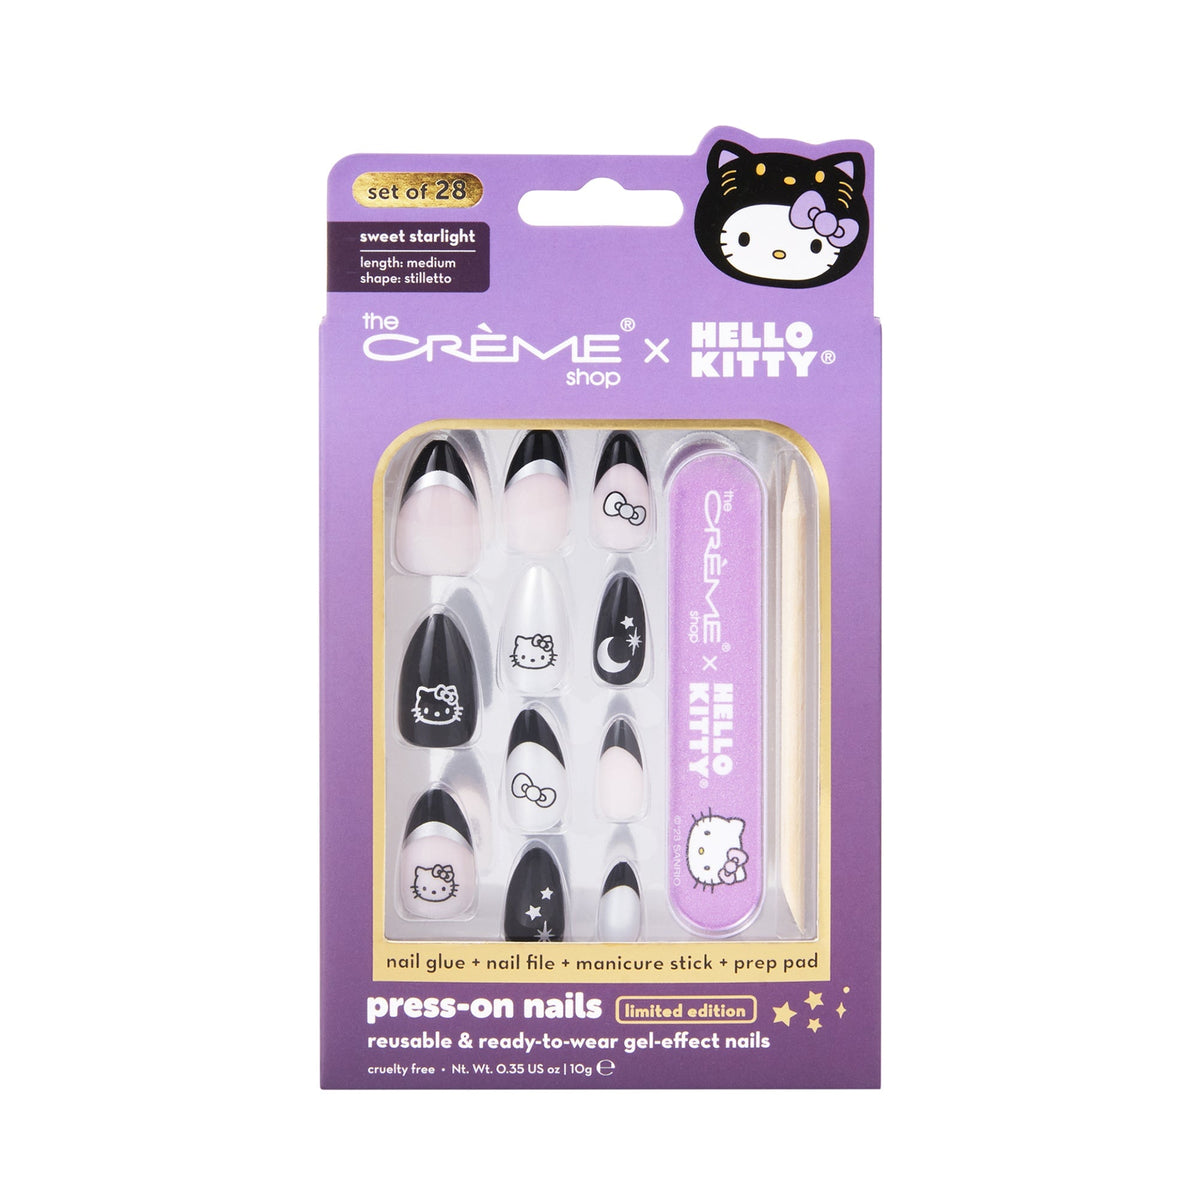 Hello Kitty Sweet Starlight Press-On Nails | The Crème Shop